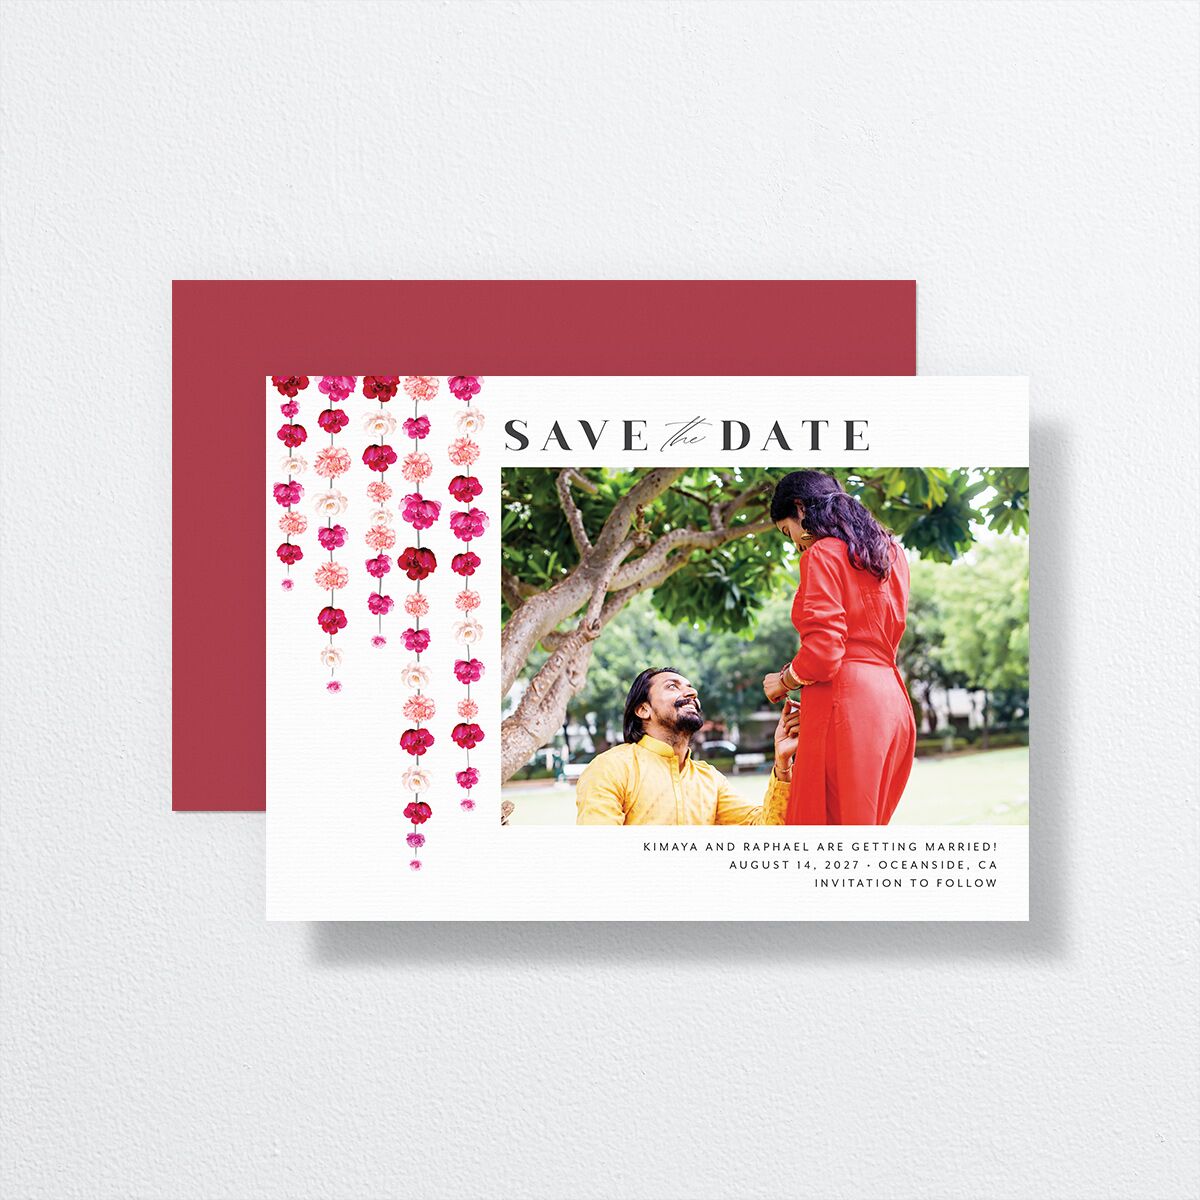 Floral Canopy Save the Date Card front-and-back in red